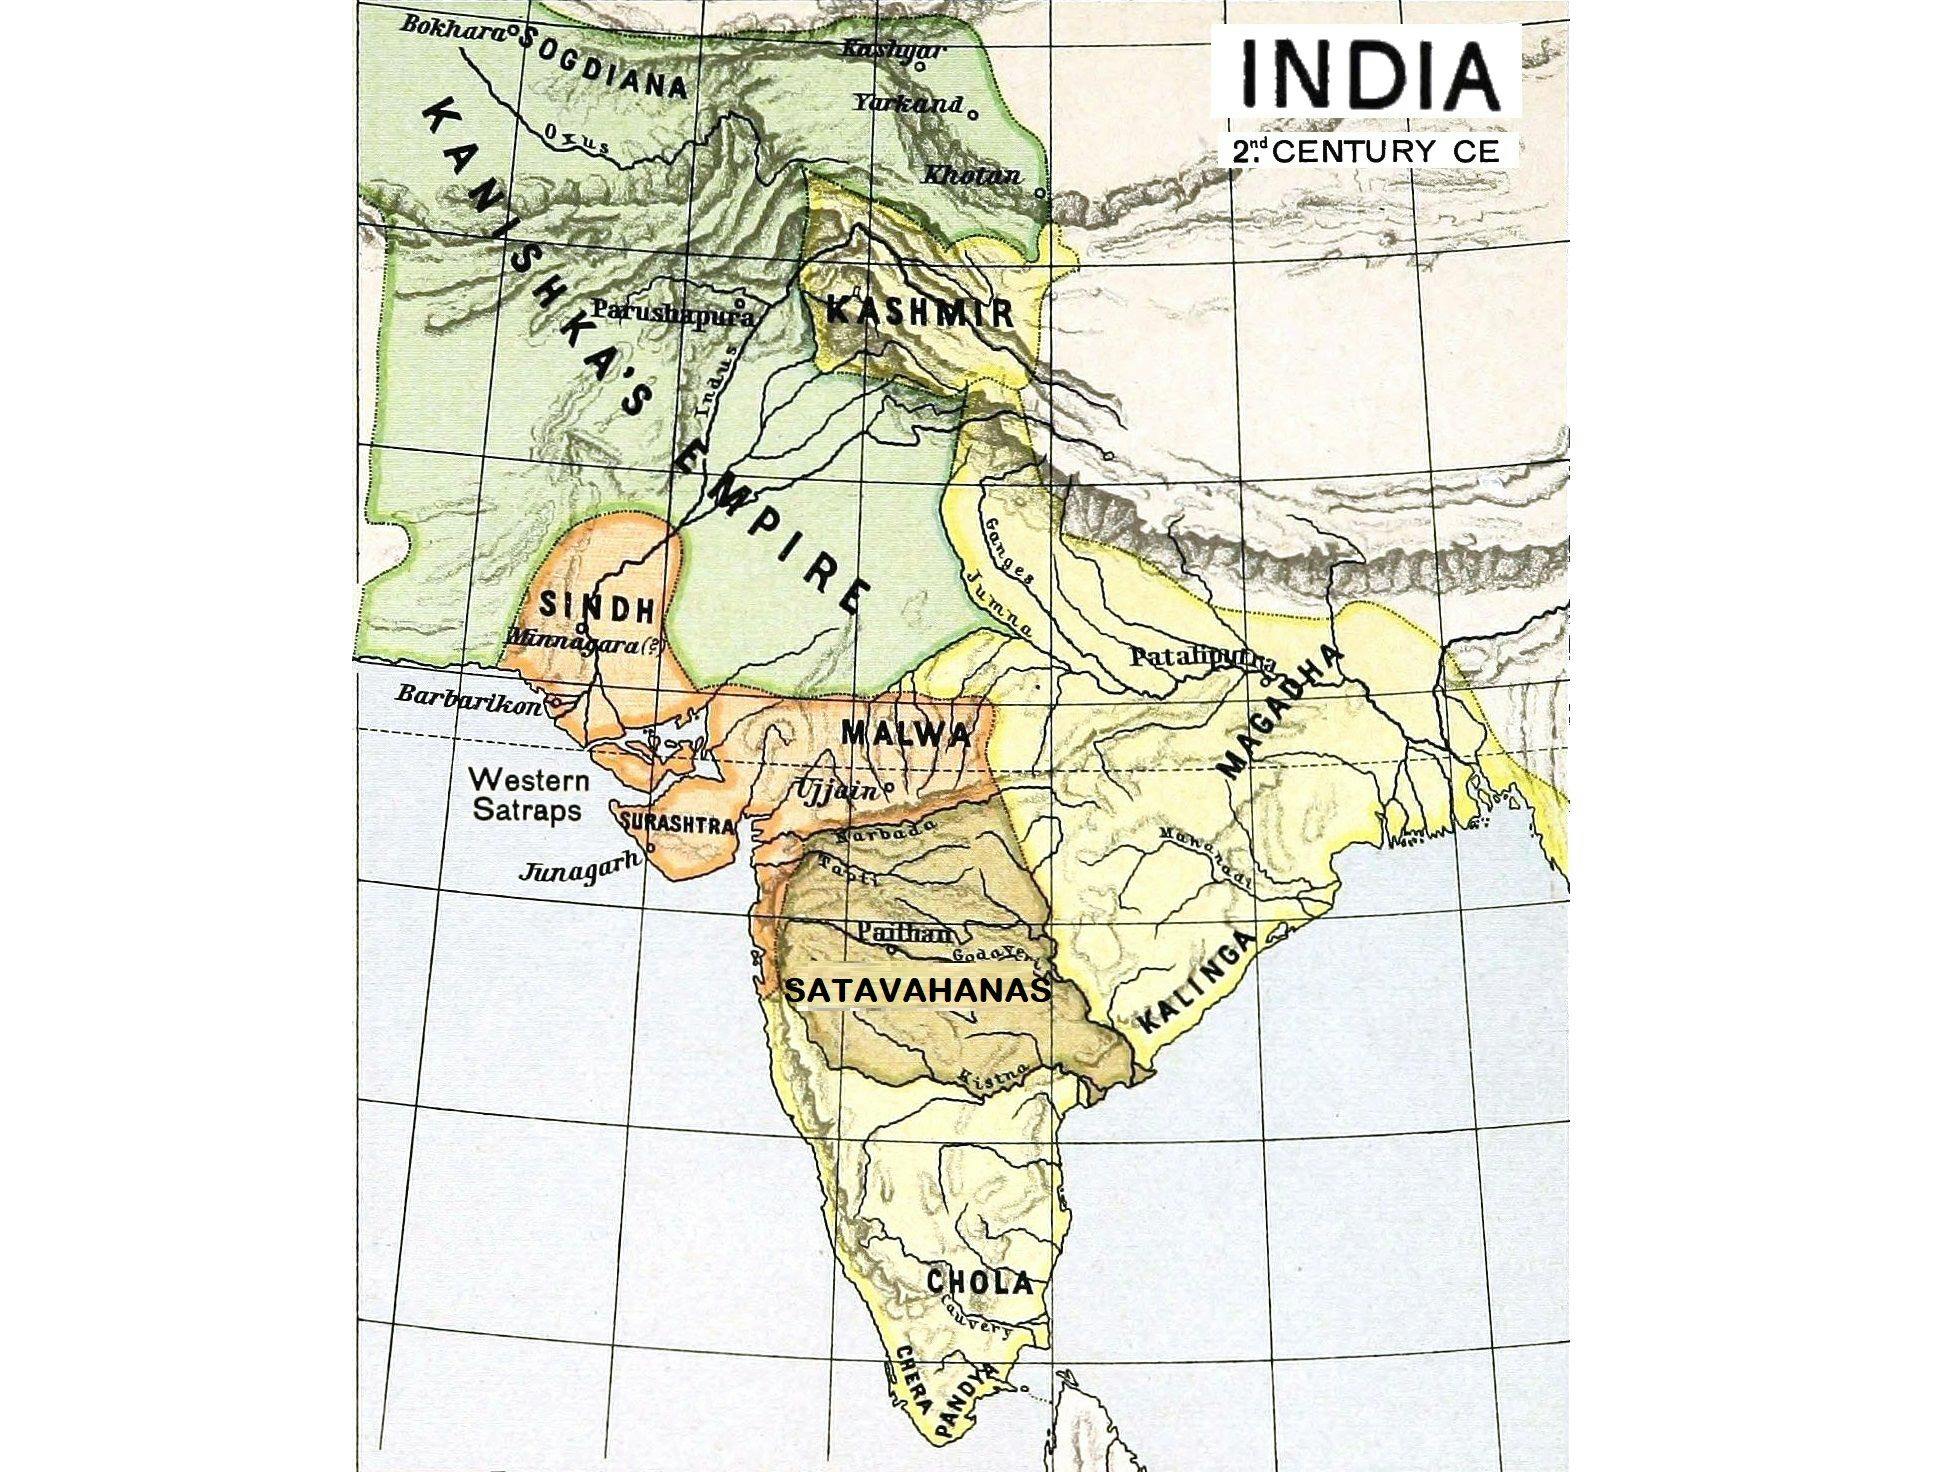 India in the 2nd century CE